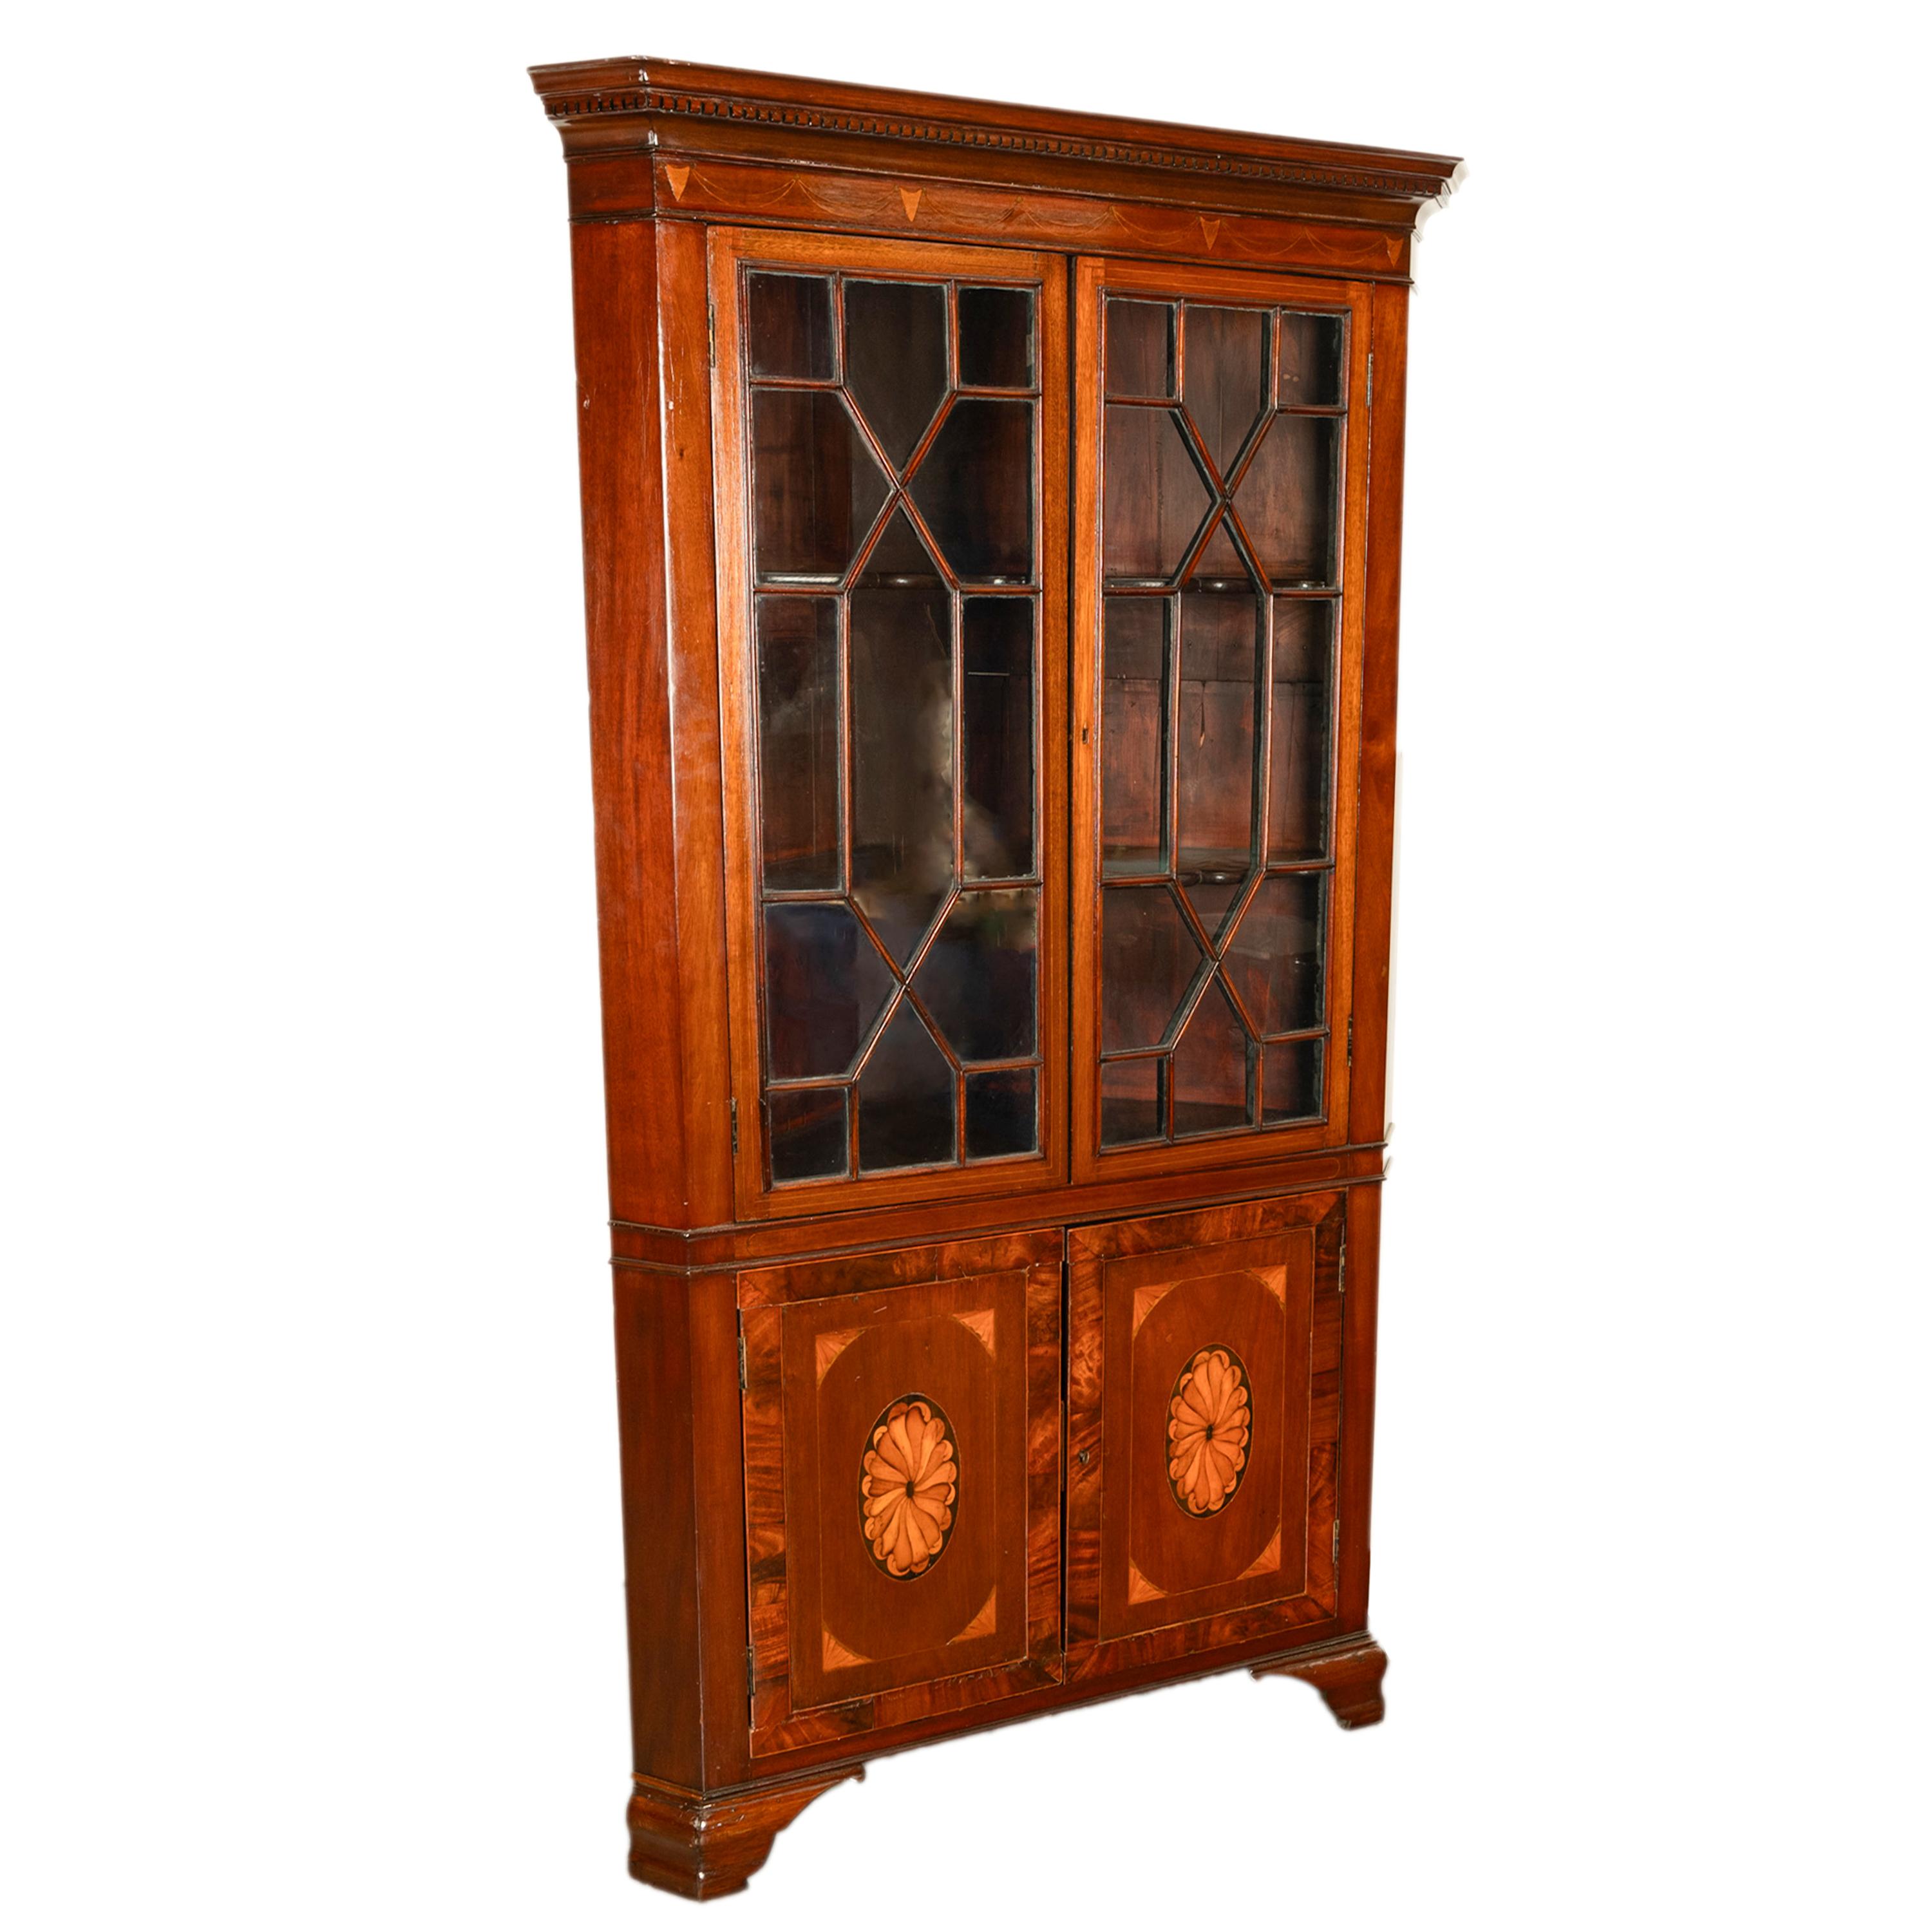 A fine antique freestanding inlaid Georgian mahogany corner cabinet, circa 1790.
The cabinet is made from flamed Cuban mahogany & having a dentil cornice to the top, below is an inlaid garland of swags & shields and the top part of the cabinet with